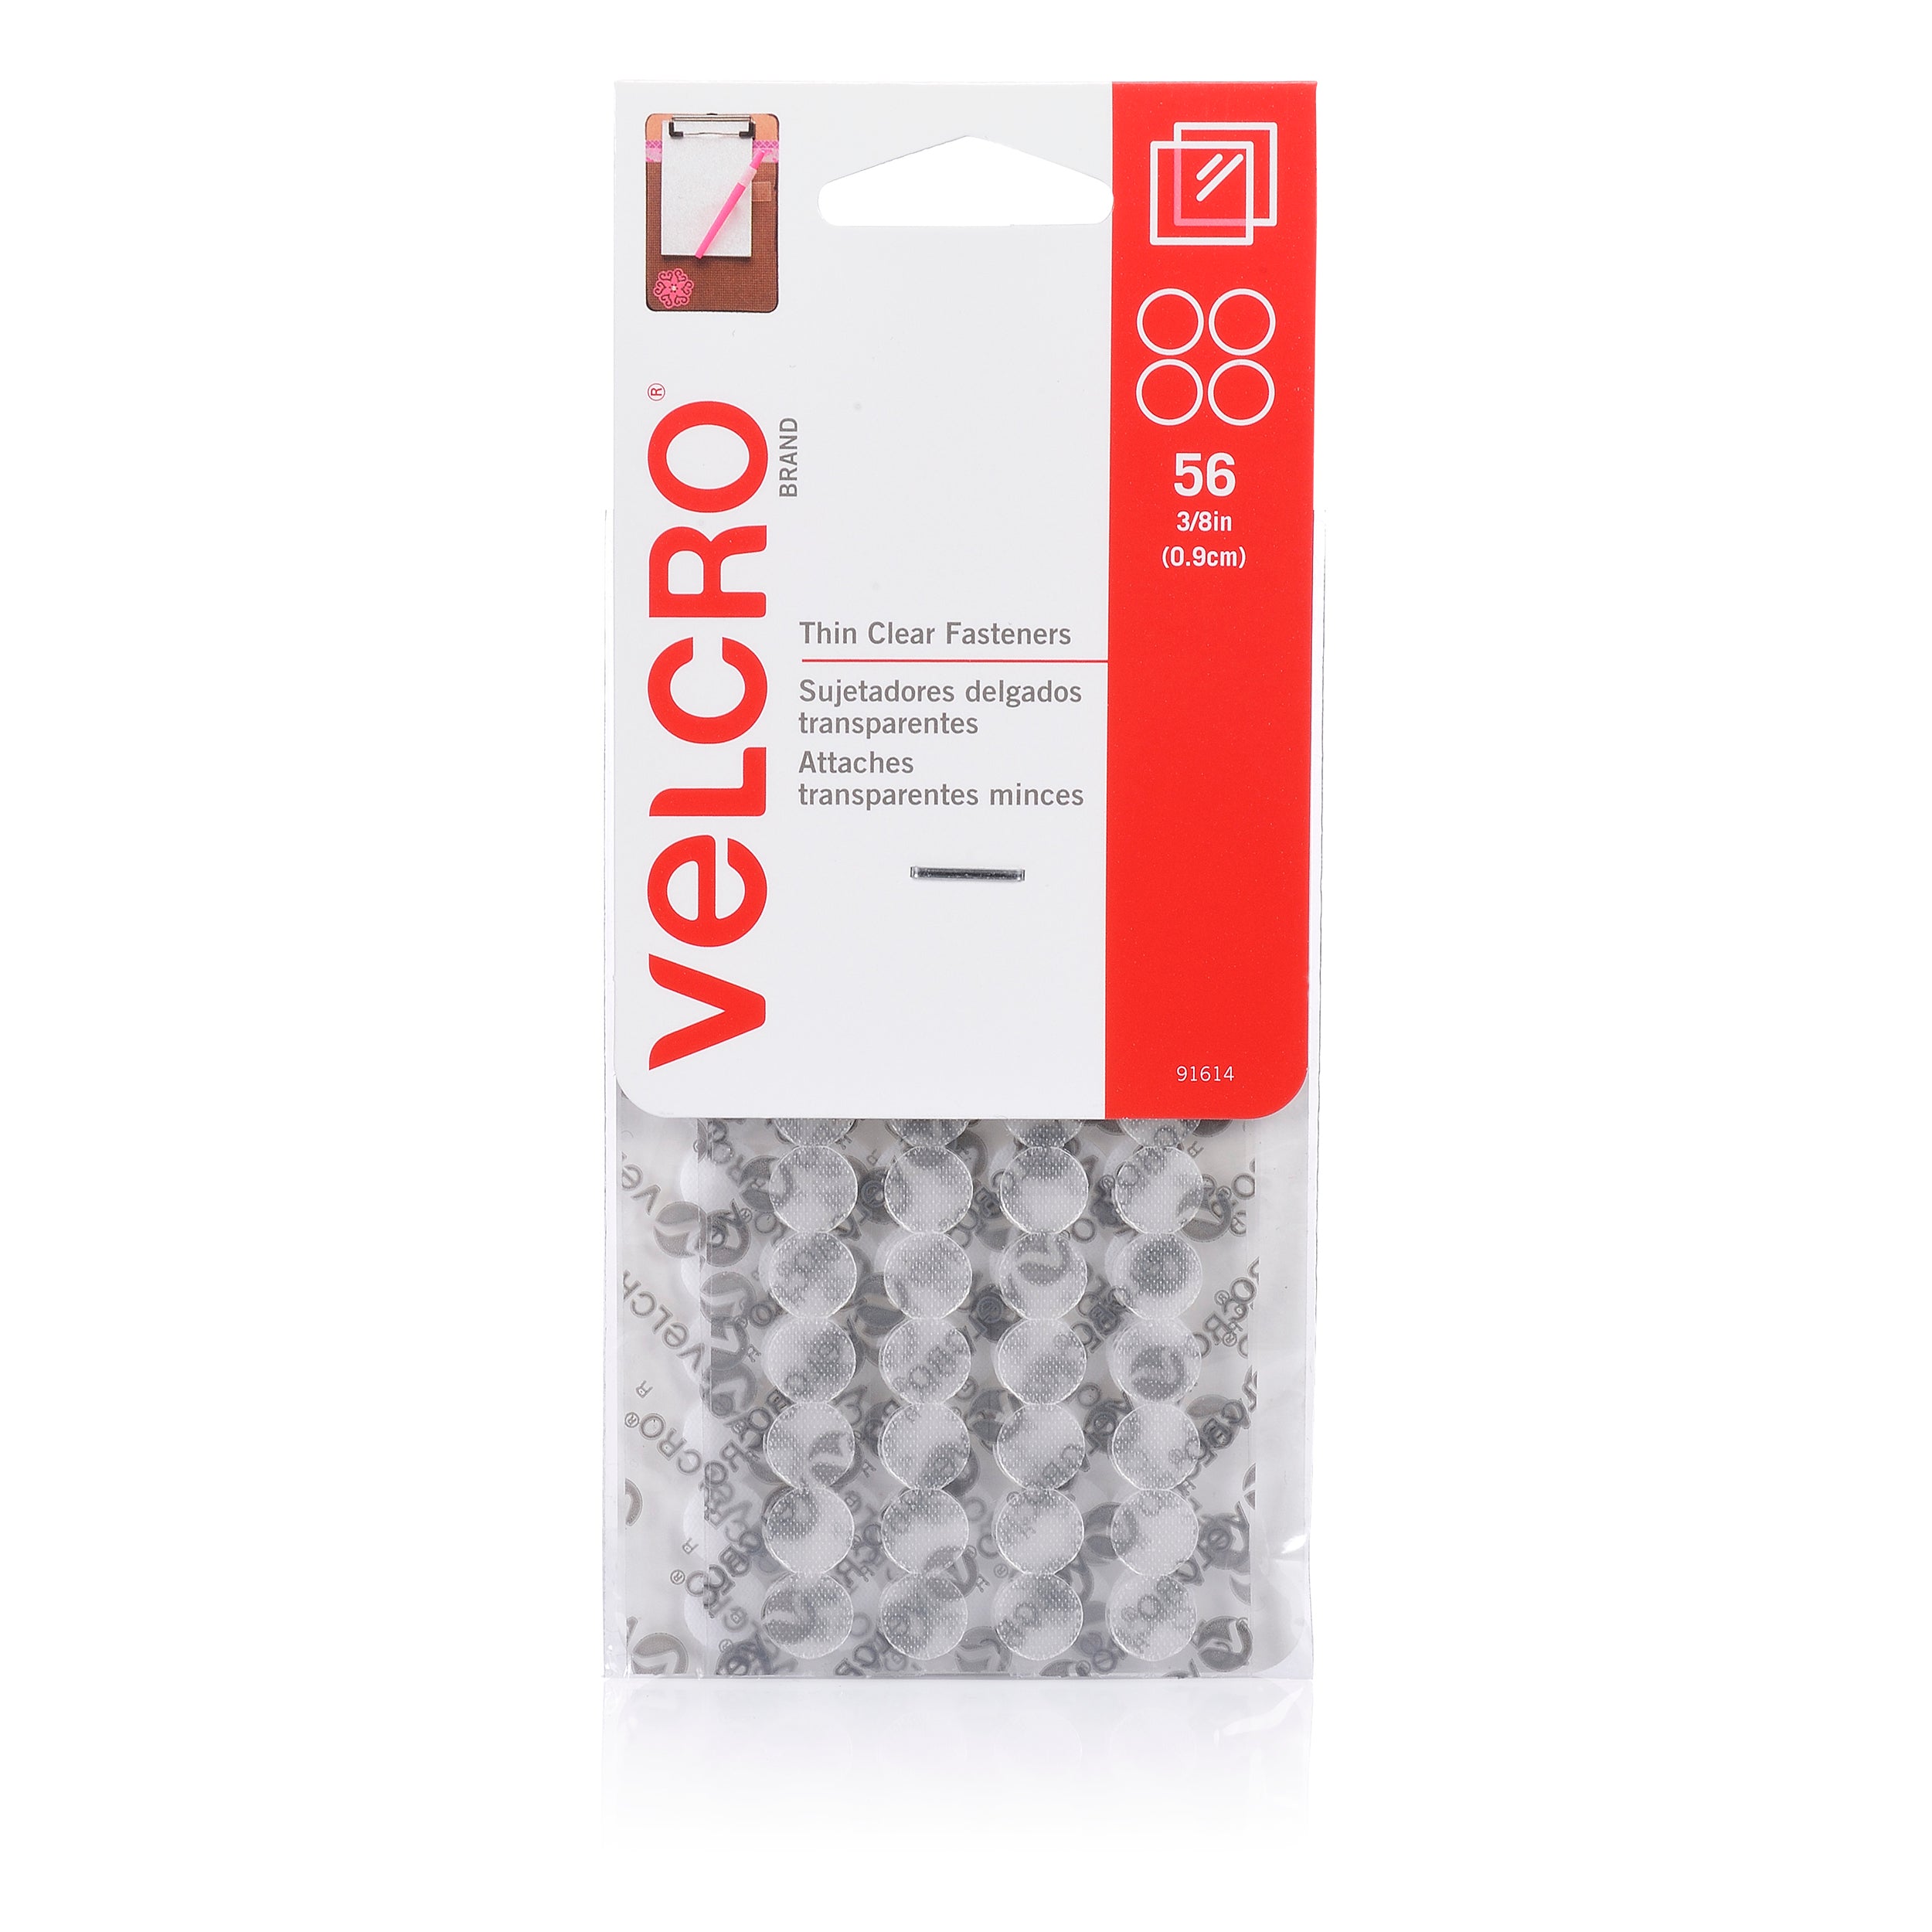 Velcro® Brand Fasteners Hook Only Tape 25mm x 3.6m White Strip